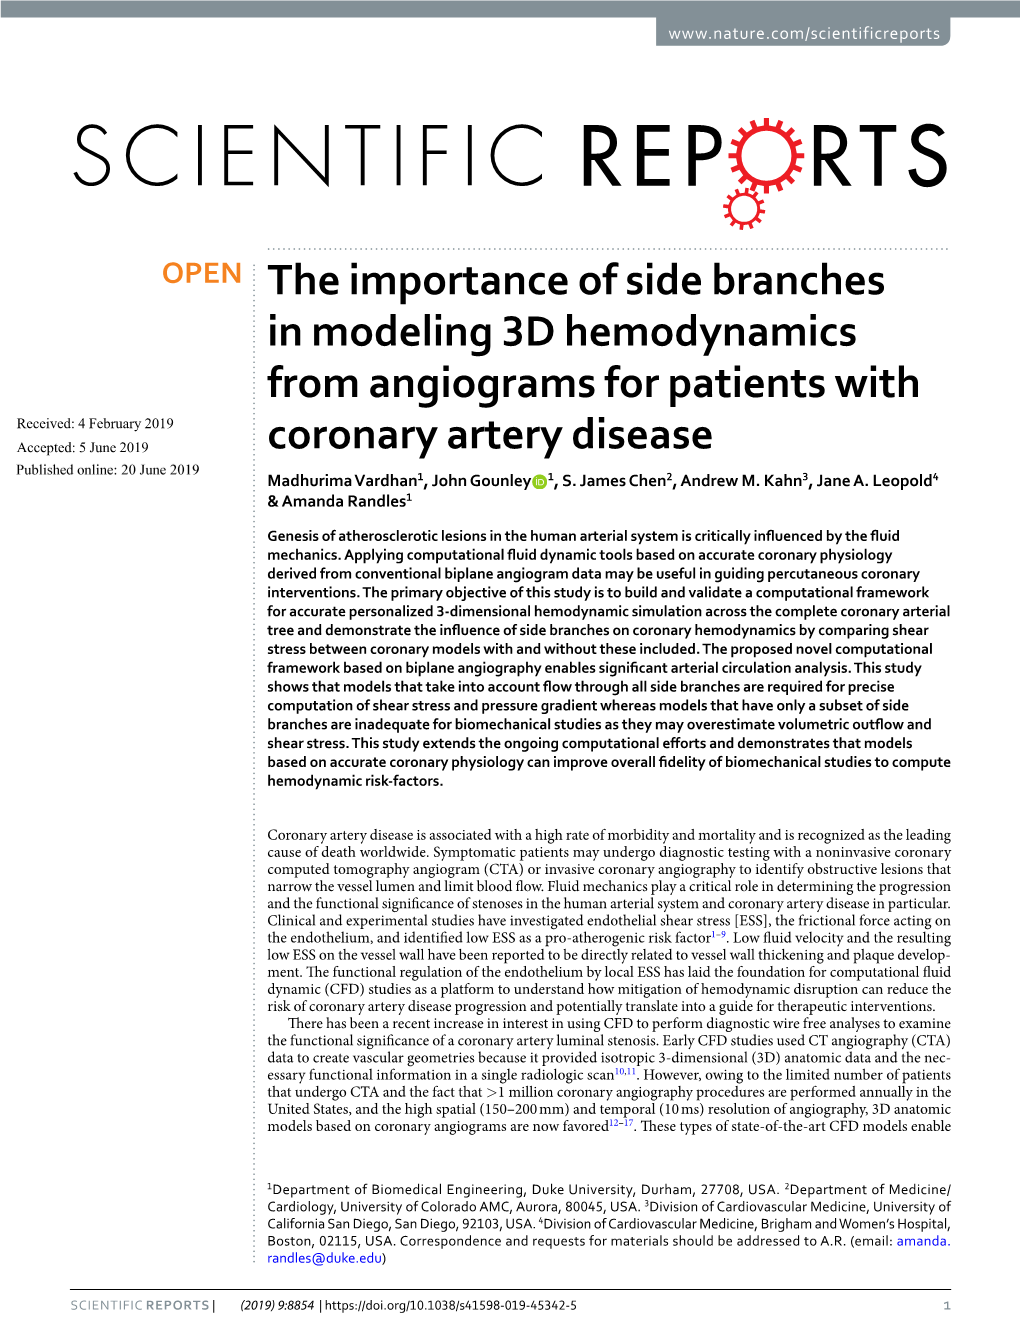 The Importance of Side Branches in Modeling 3D Hemodynamics From